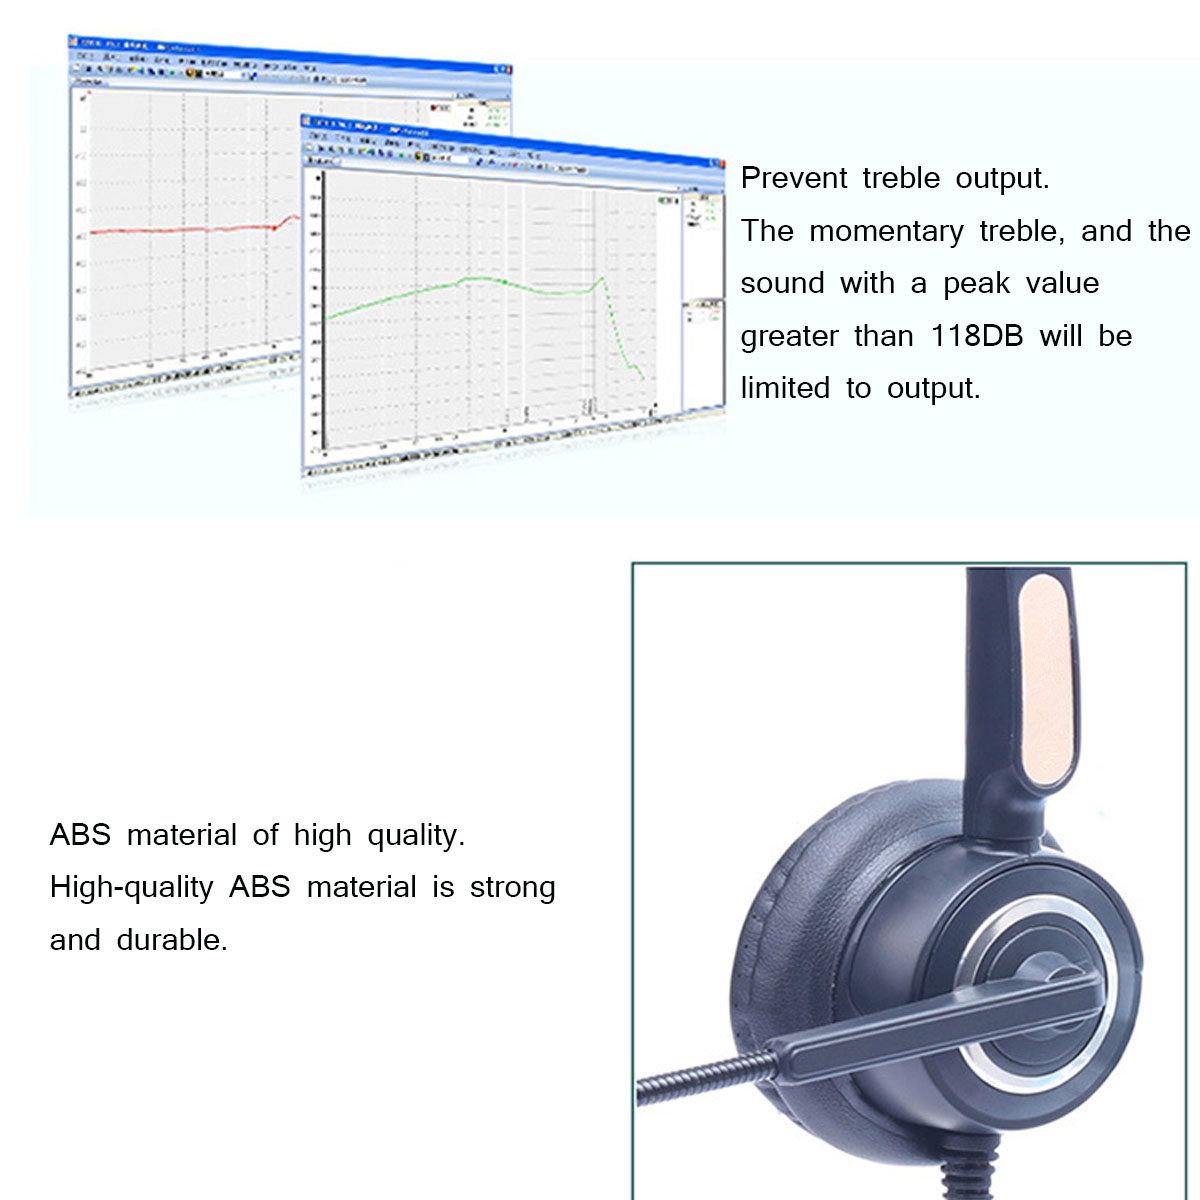 35mm-USB-Headset-Computer-Headphones-Noise-Reduction-Microphone-for-PC-Laptop-Mobile-Phone-1698010